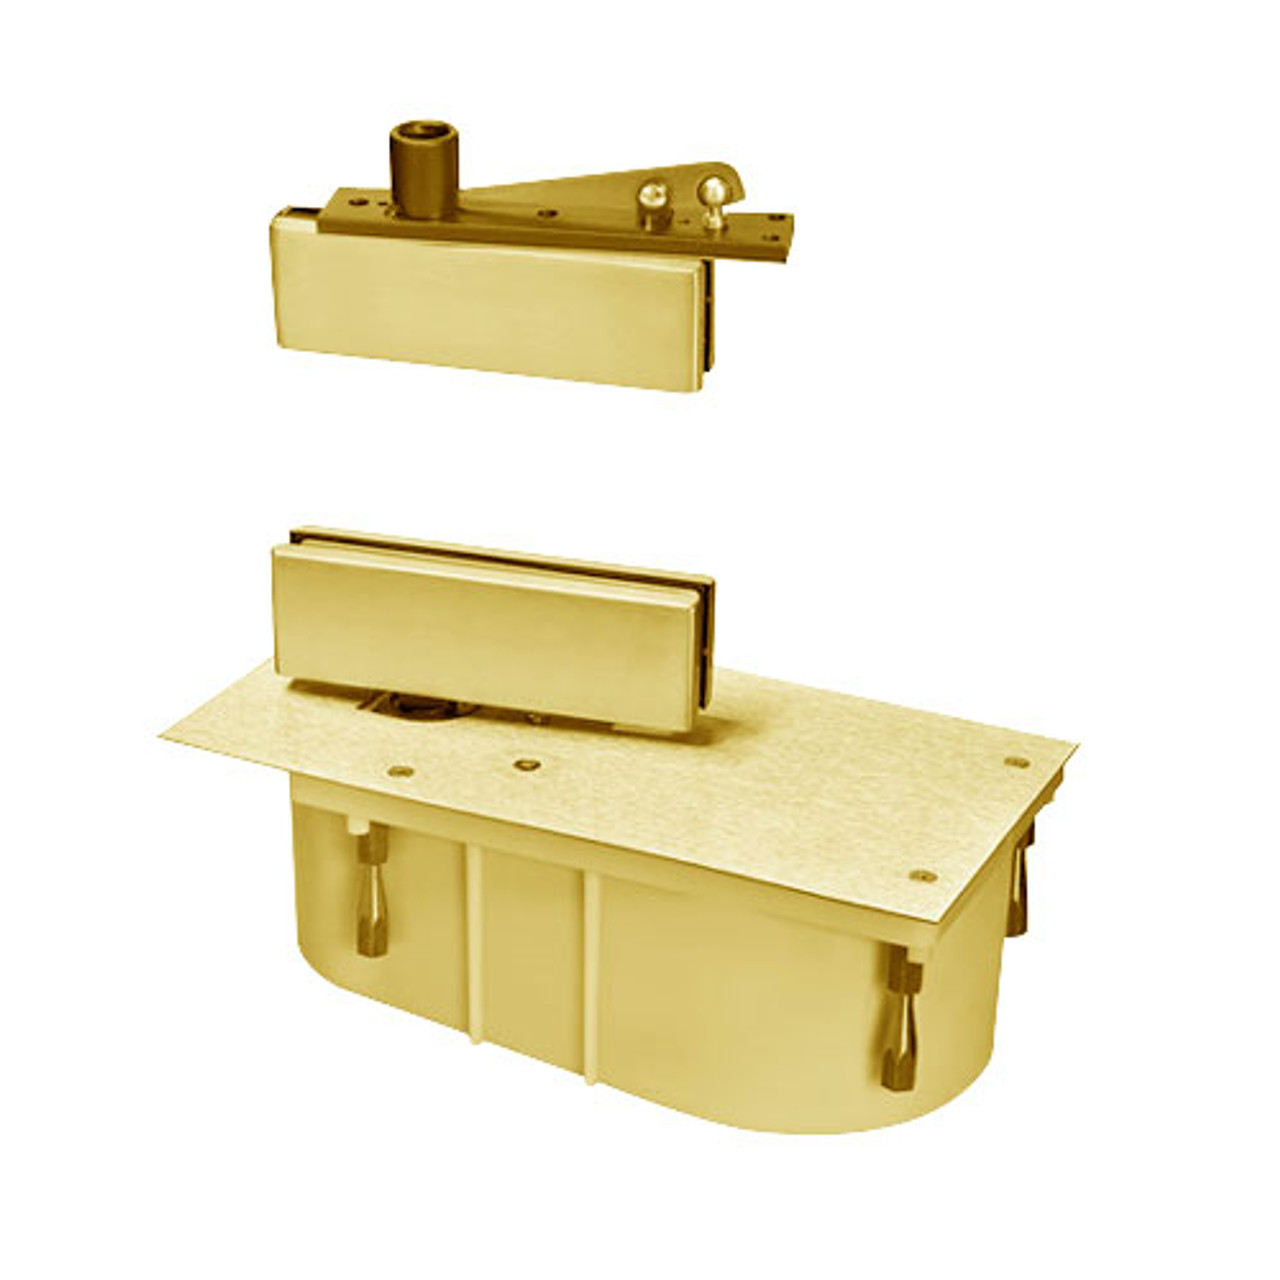 428-85N-LFP-LH-605 Rixson 428 Series Heavy Duty Single Acting Center Hung Floor Closer with Patch Fittings in Bright Brass Finish